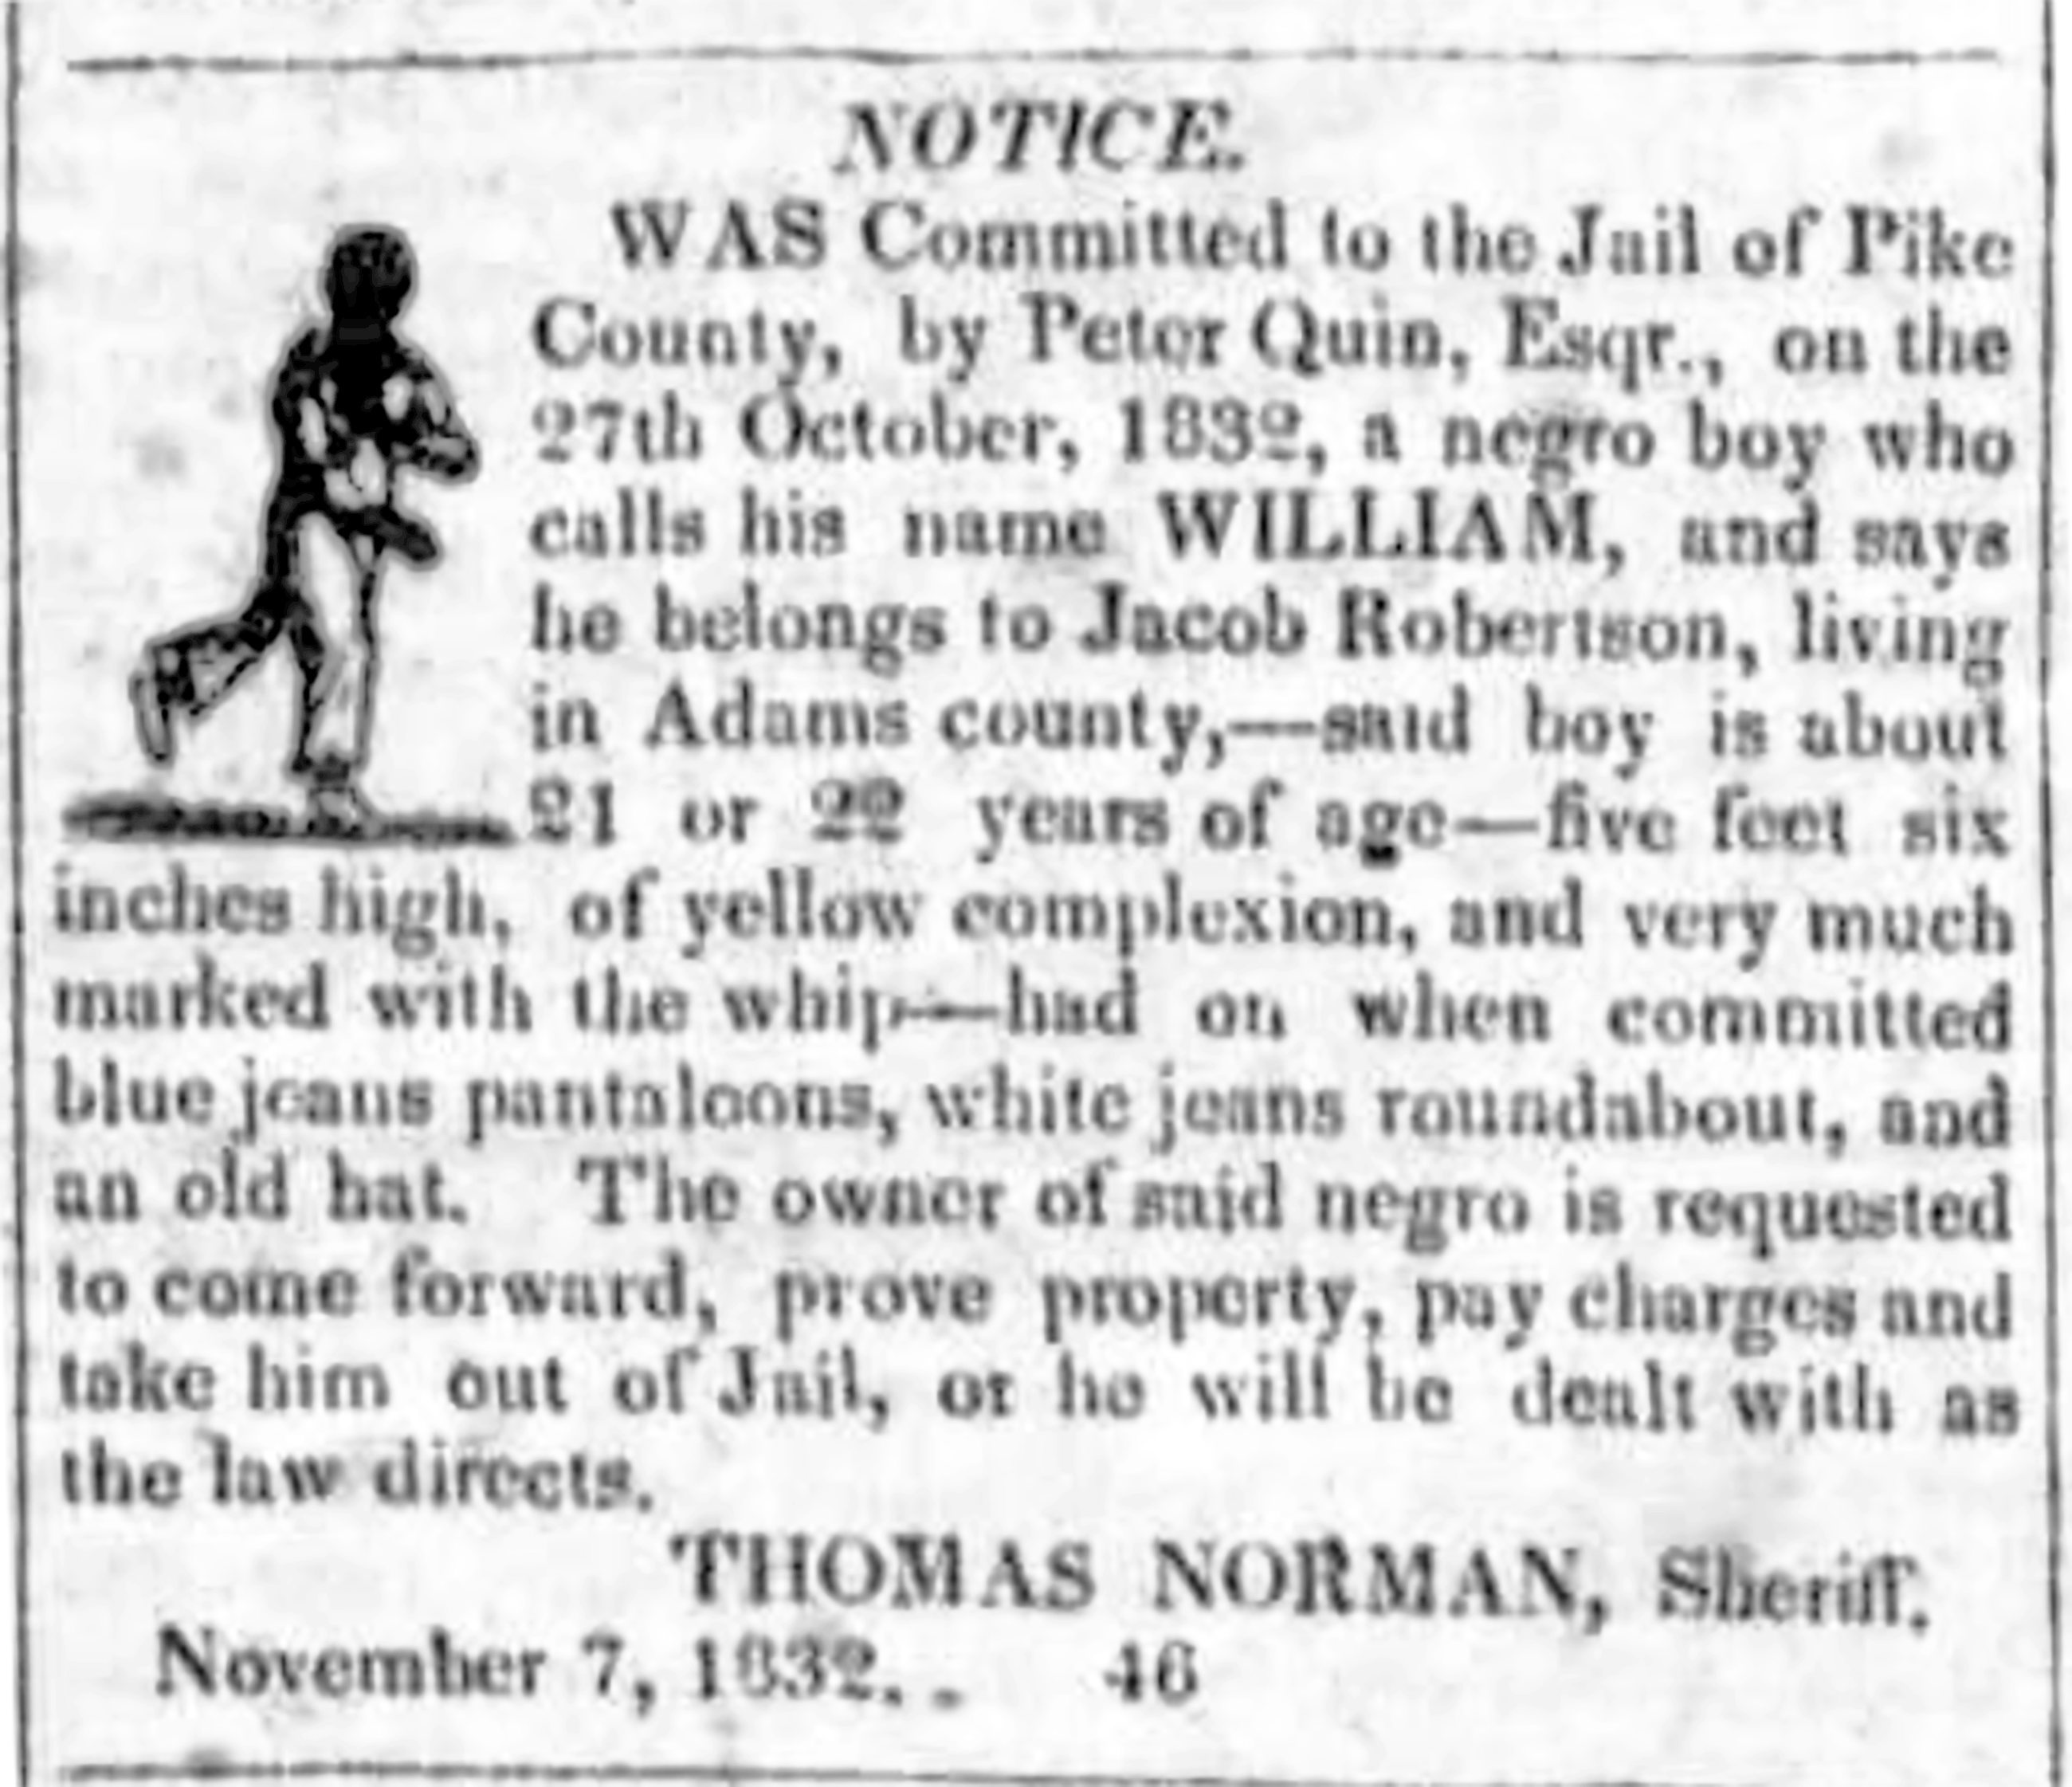 https://www.nps.gov/natr/learn/historyculture/images/whipped-boy-from-Adams-county.png